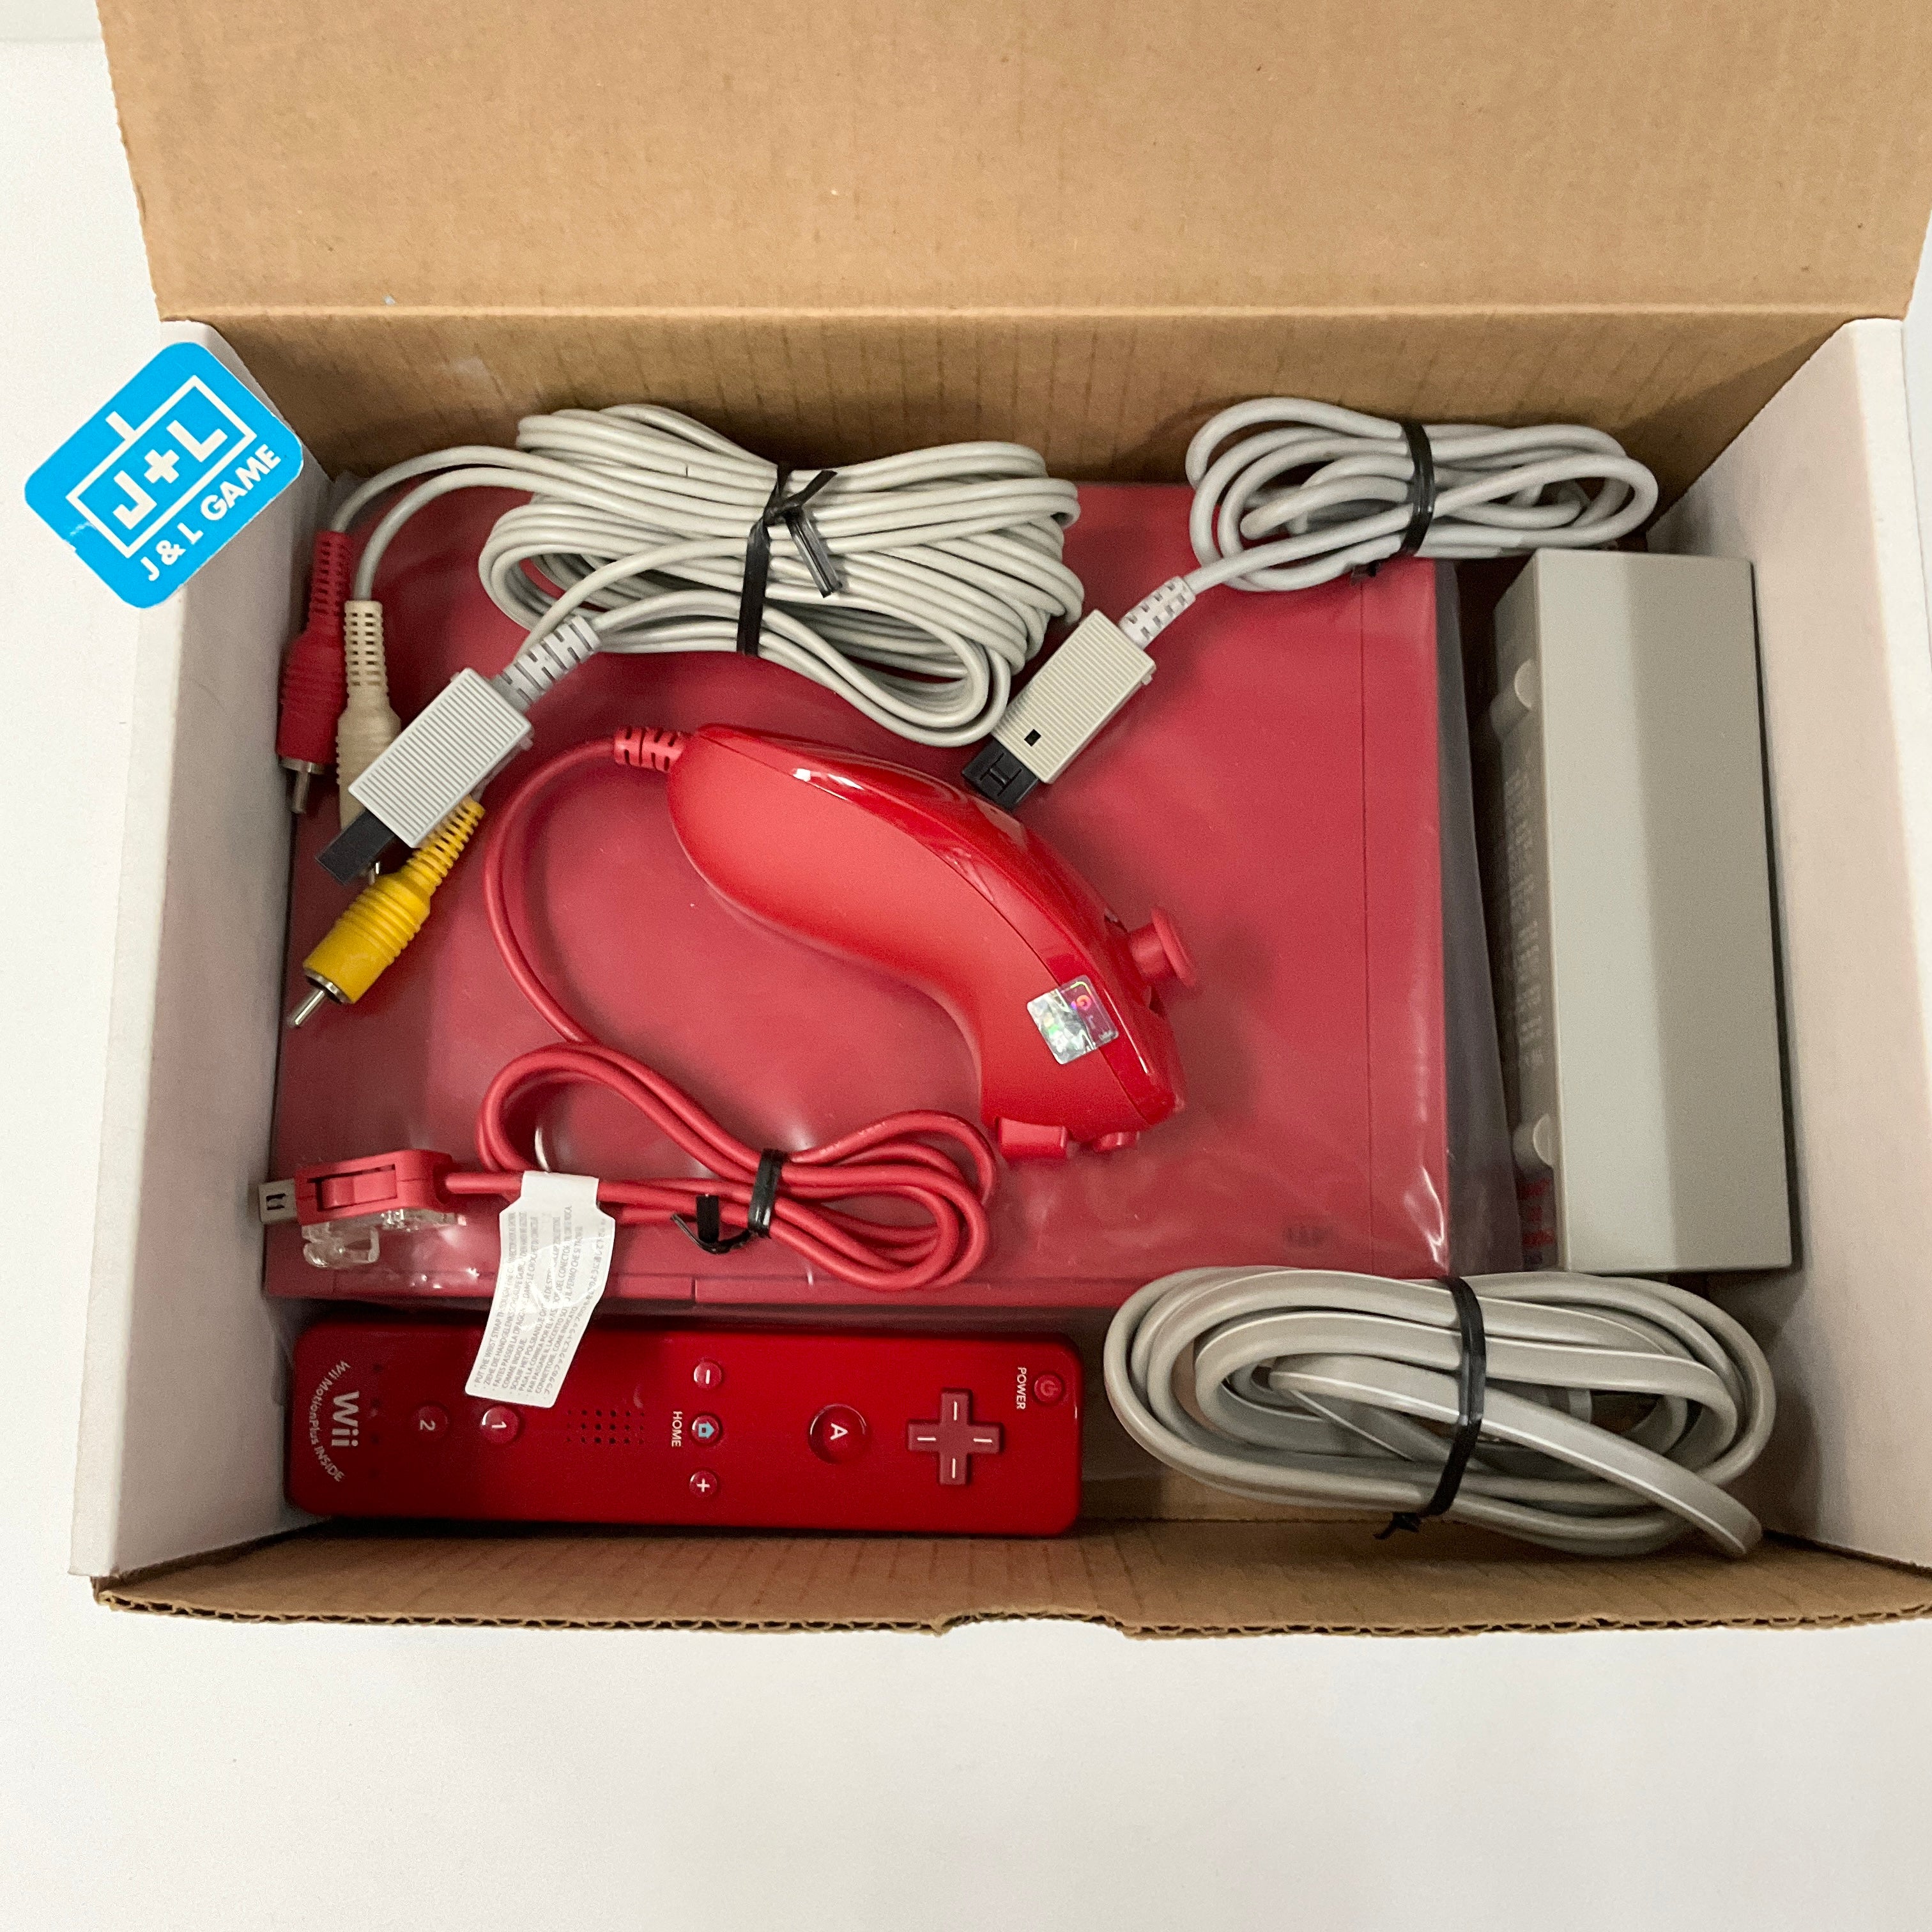 Nintendo Wii Console (Red) - Nintendo Wii [Pre-Owned] Consoles Nintendo   